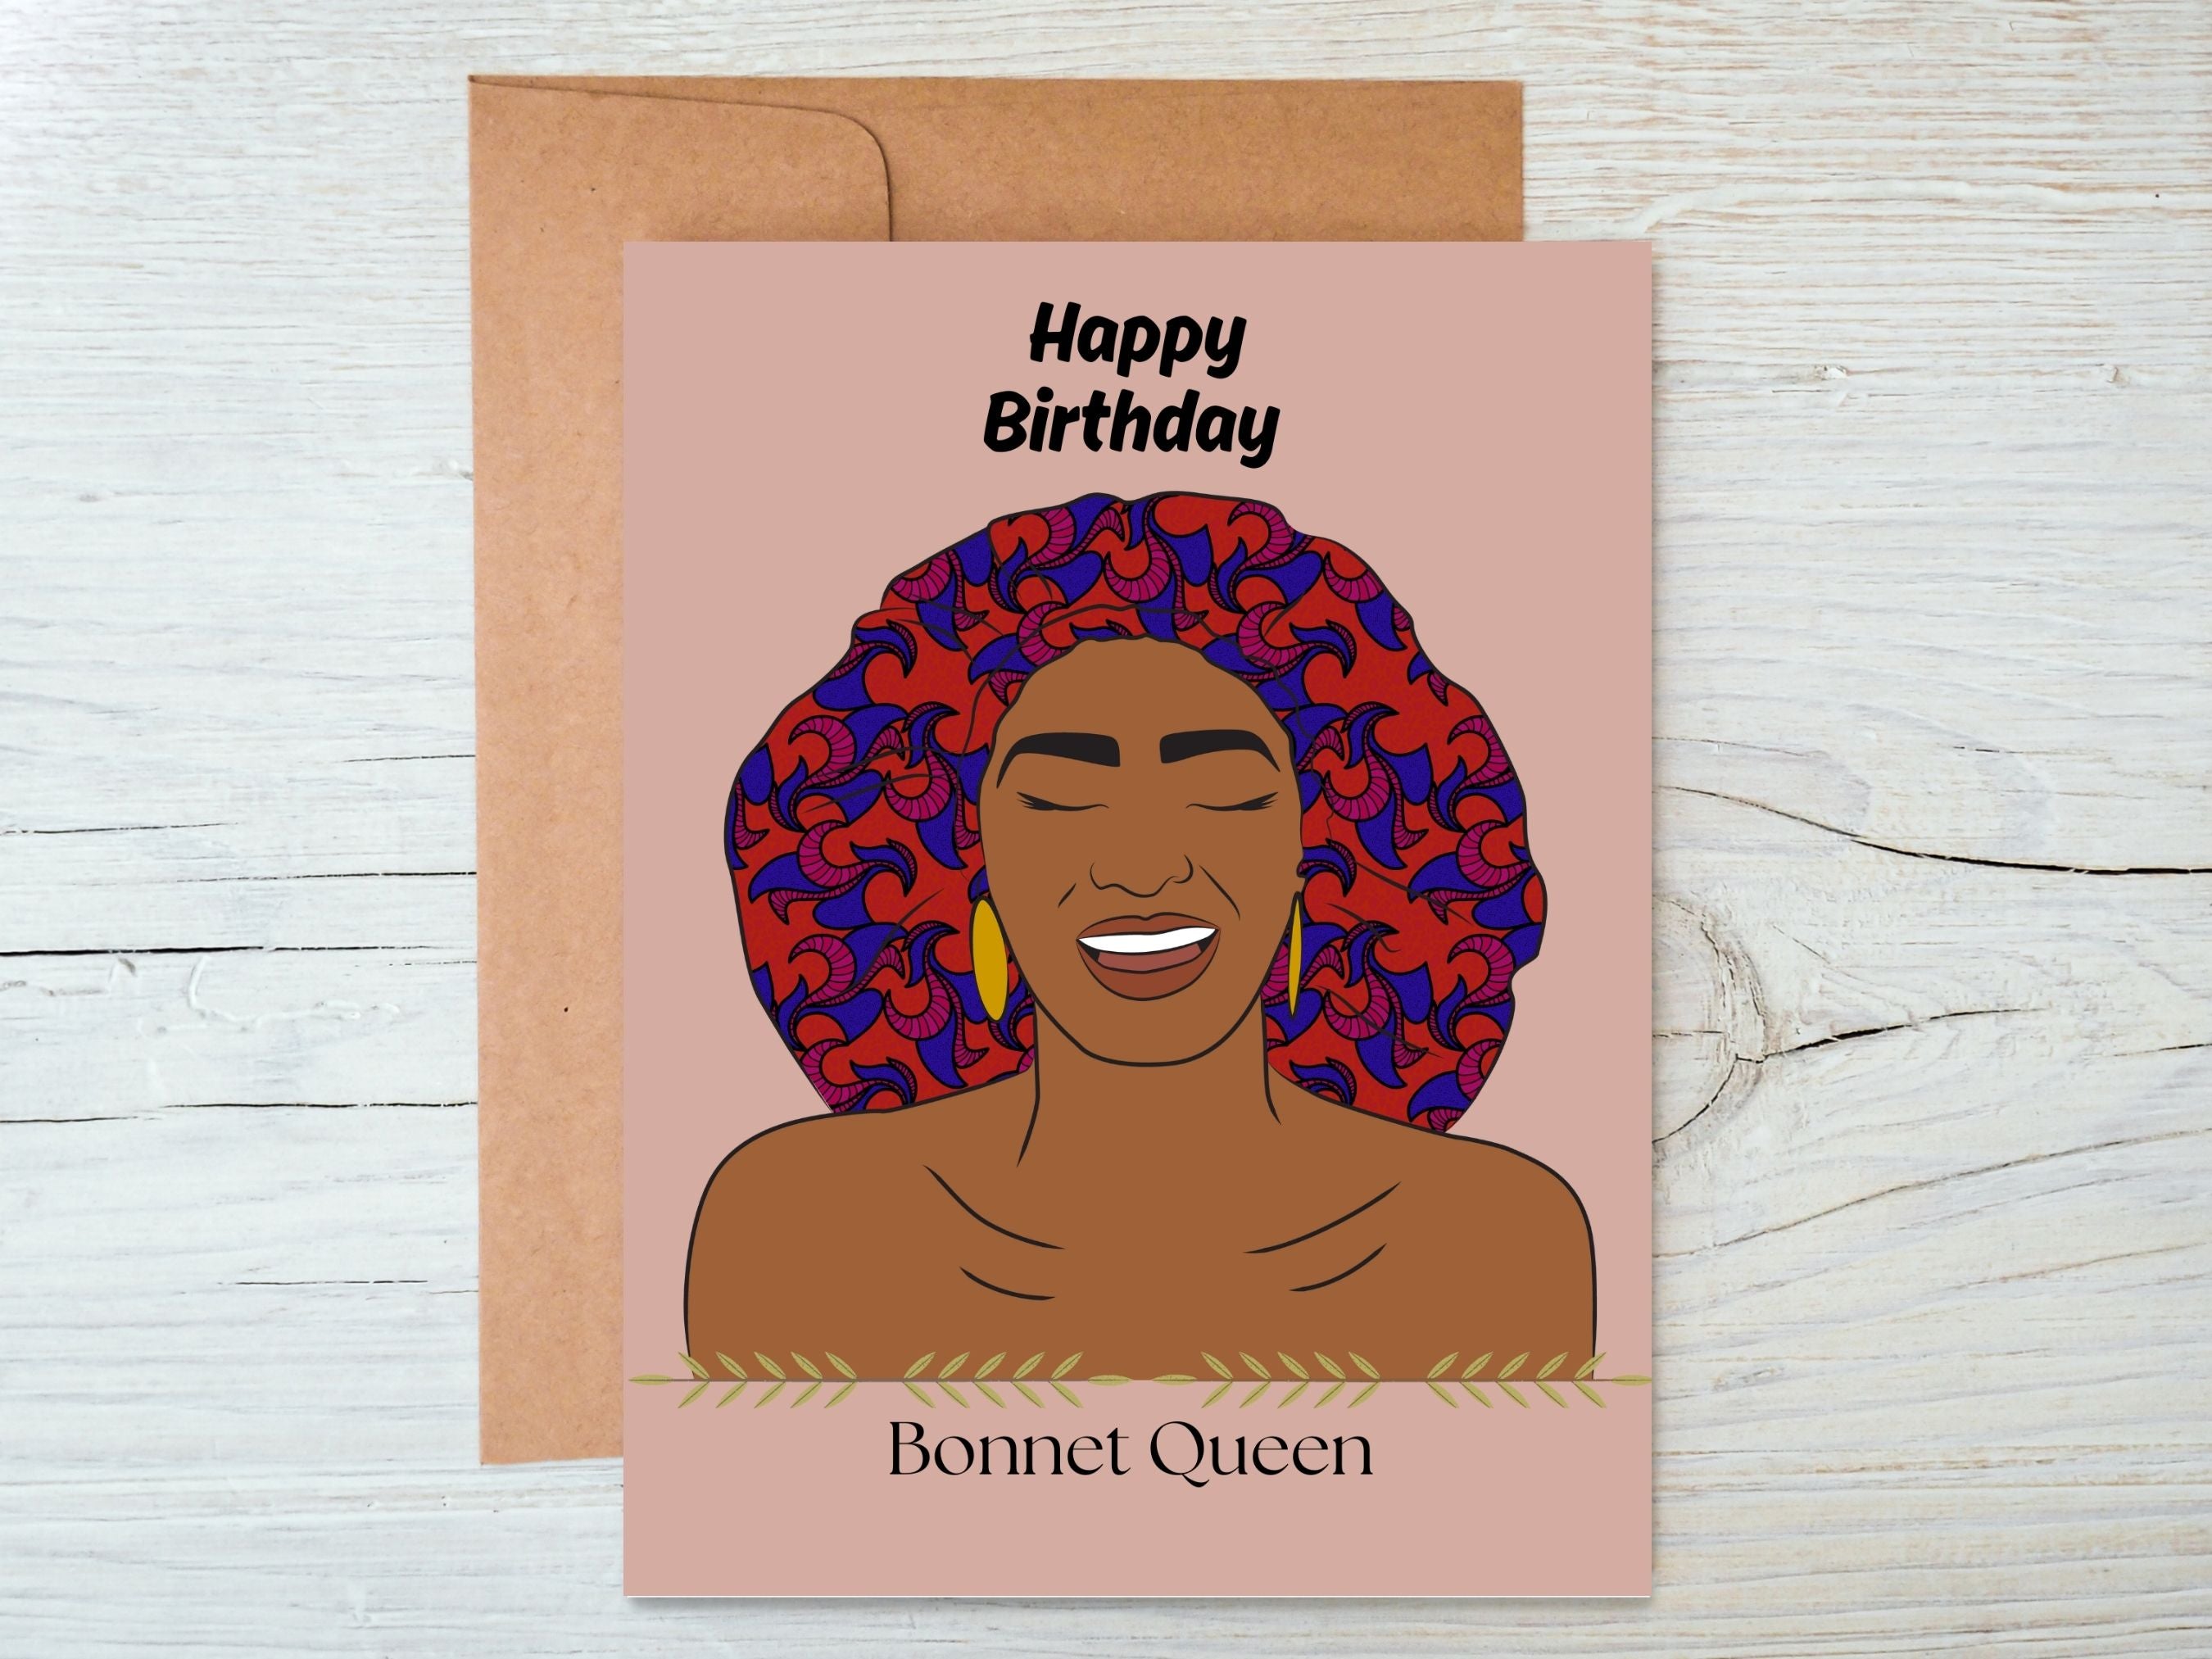 Black woman birthday card. Bonnet Queen humour card diversecards Black greeting cards 